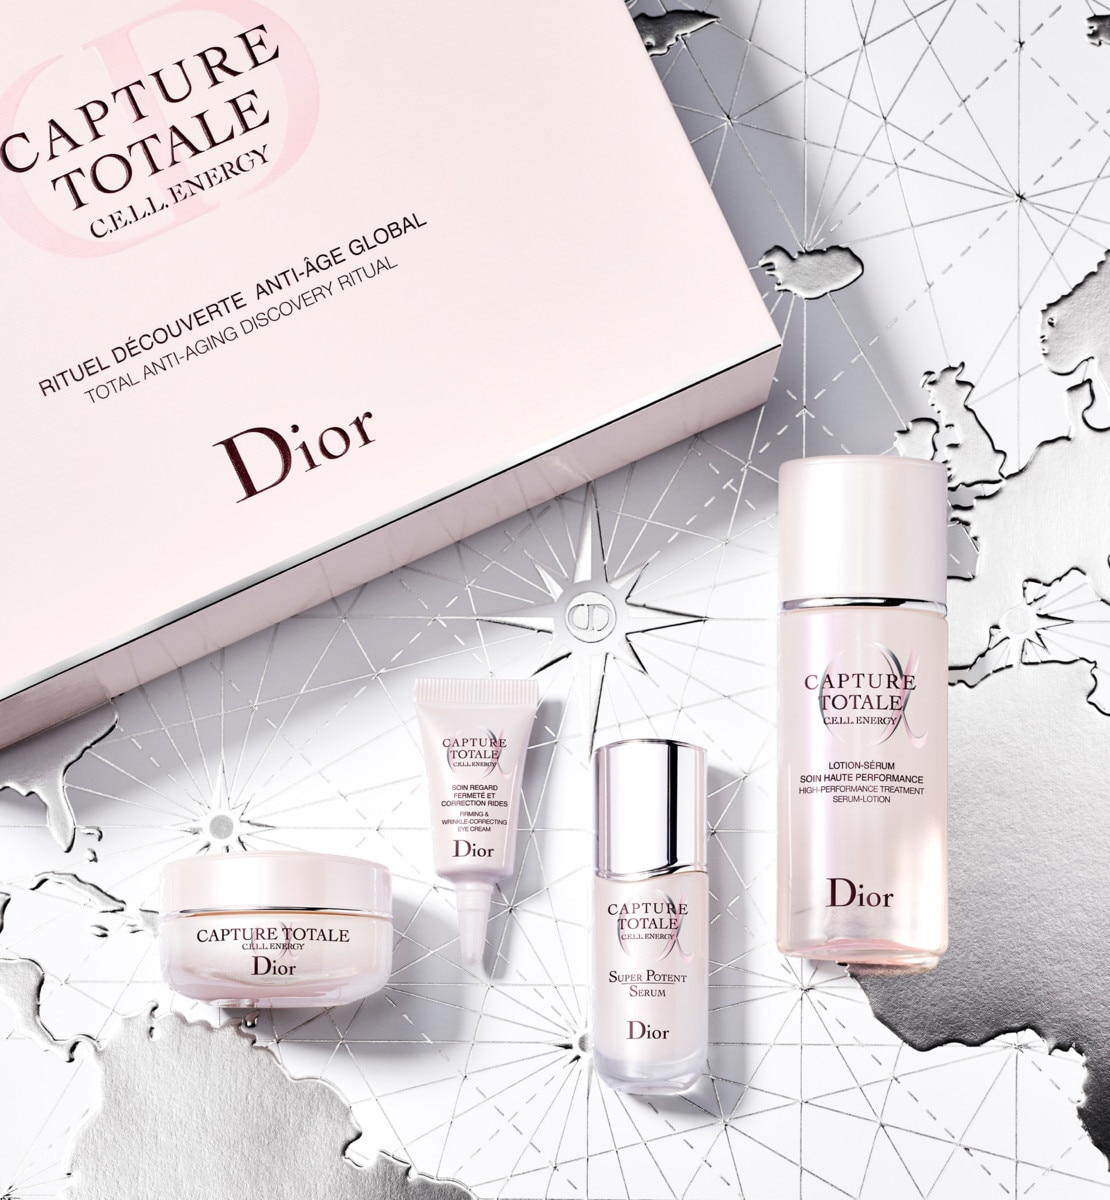 CAPTURE TOTALE the total age-defying skincare ritual